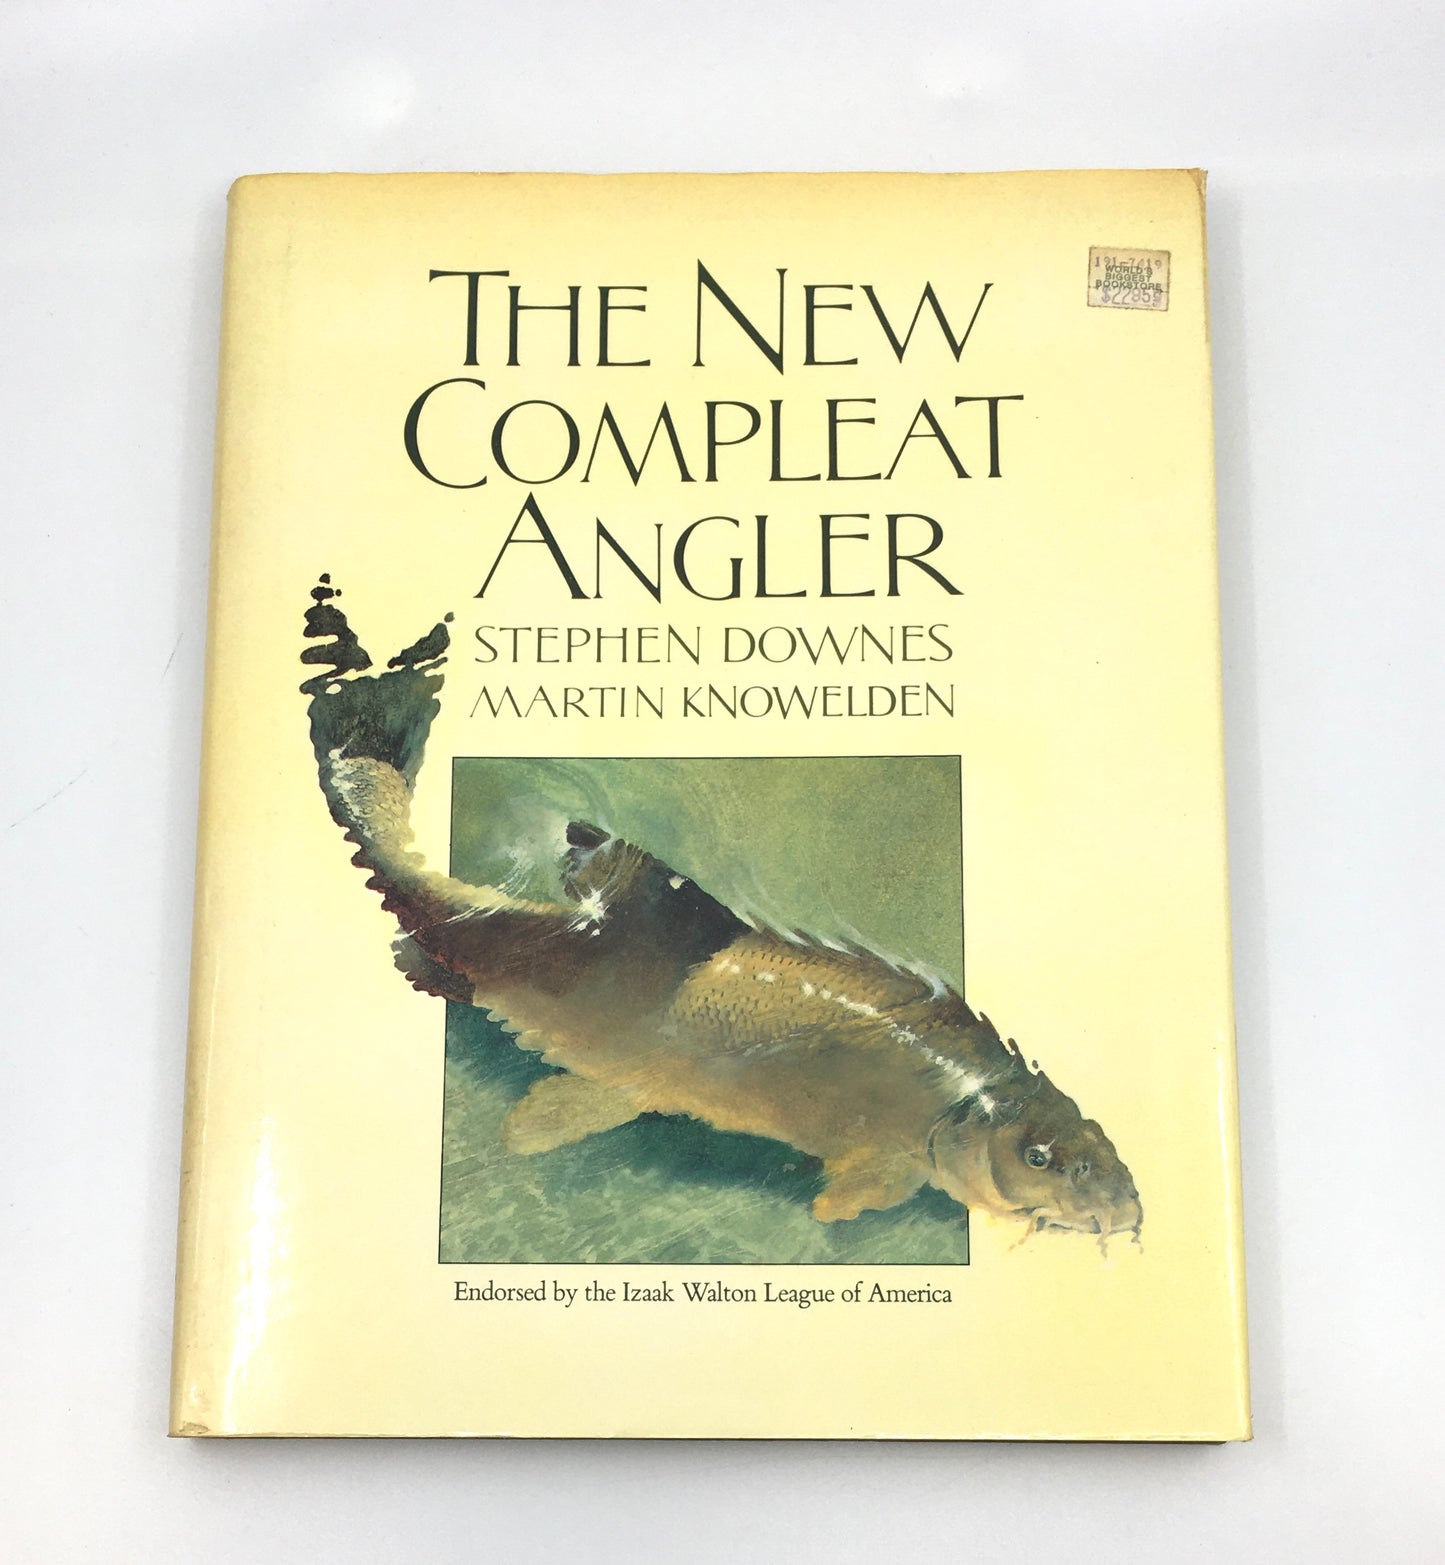 The New Compleat Angler